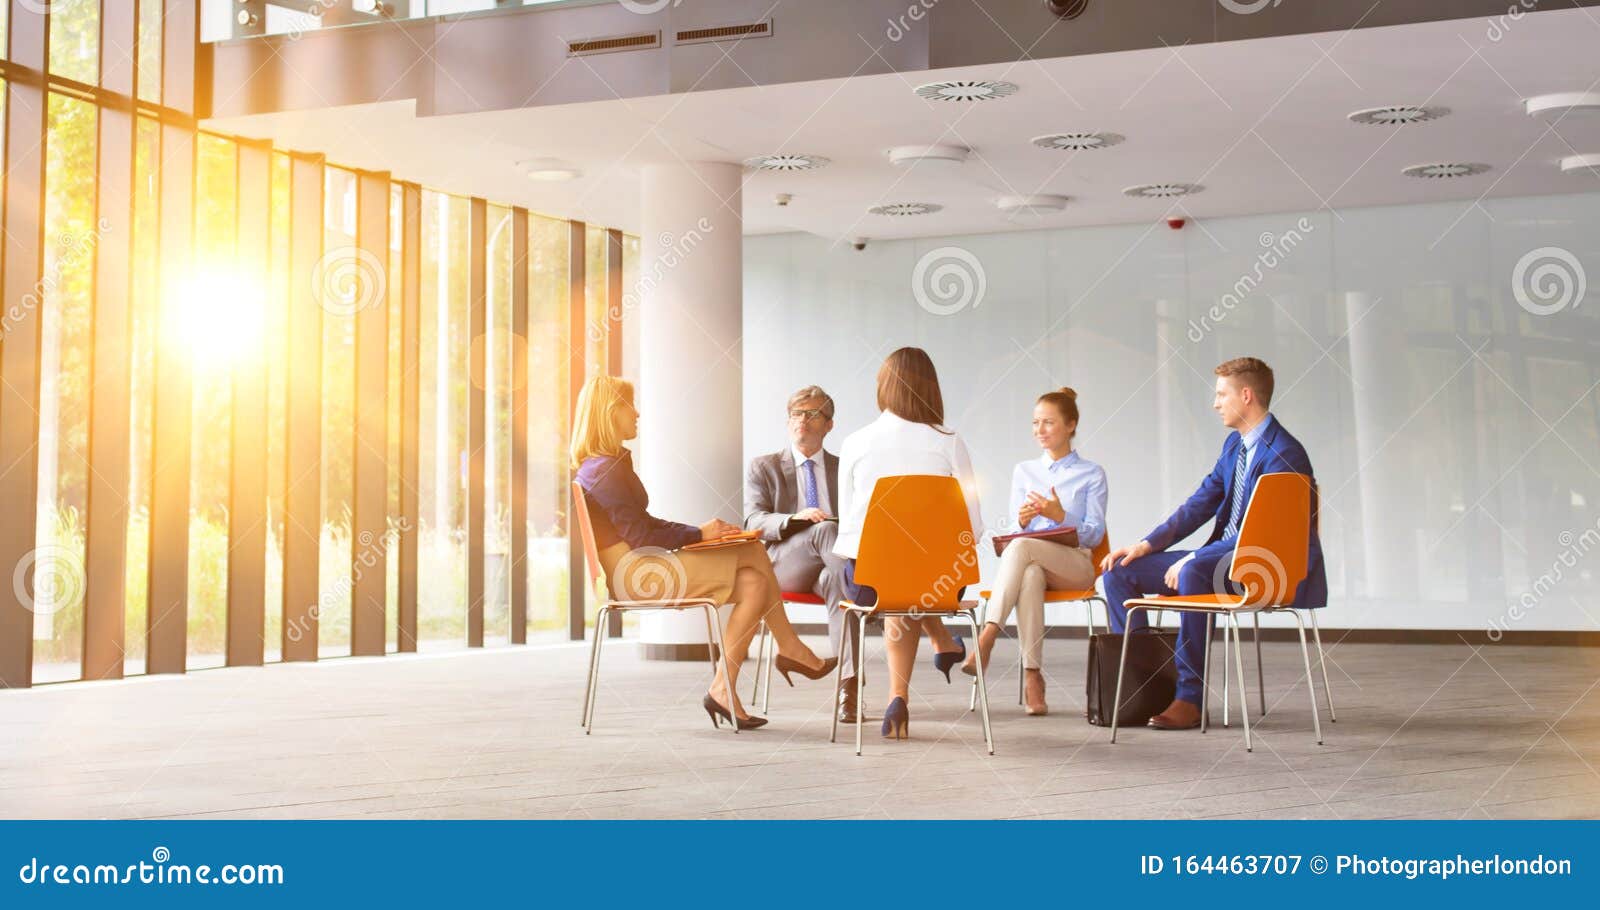 business colleagues planning strategy while sitting on chairs during meeting